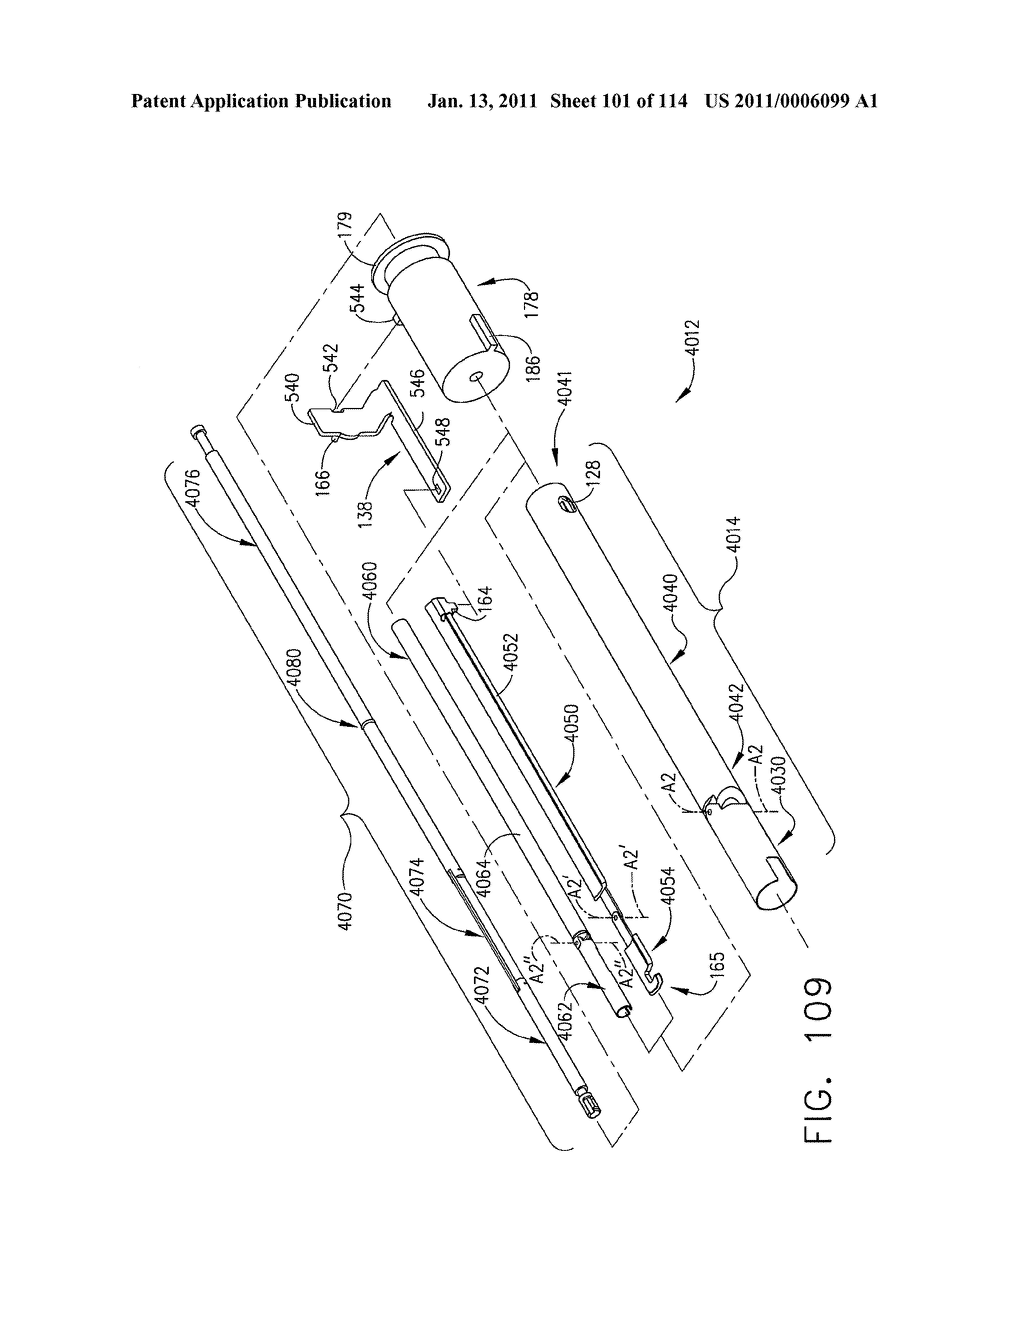 SURGICAL STAPLING APPARATUS WITH CONTROL FEATURES OPERABLE WITH ONE HAND - diagram, schematic, and image 102